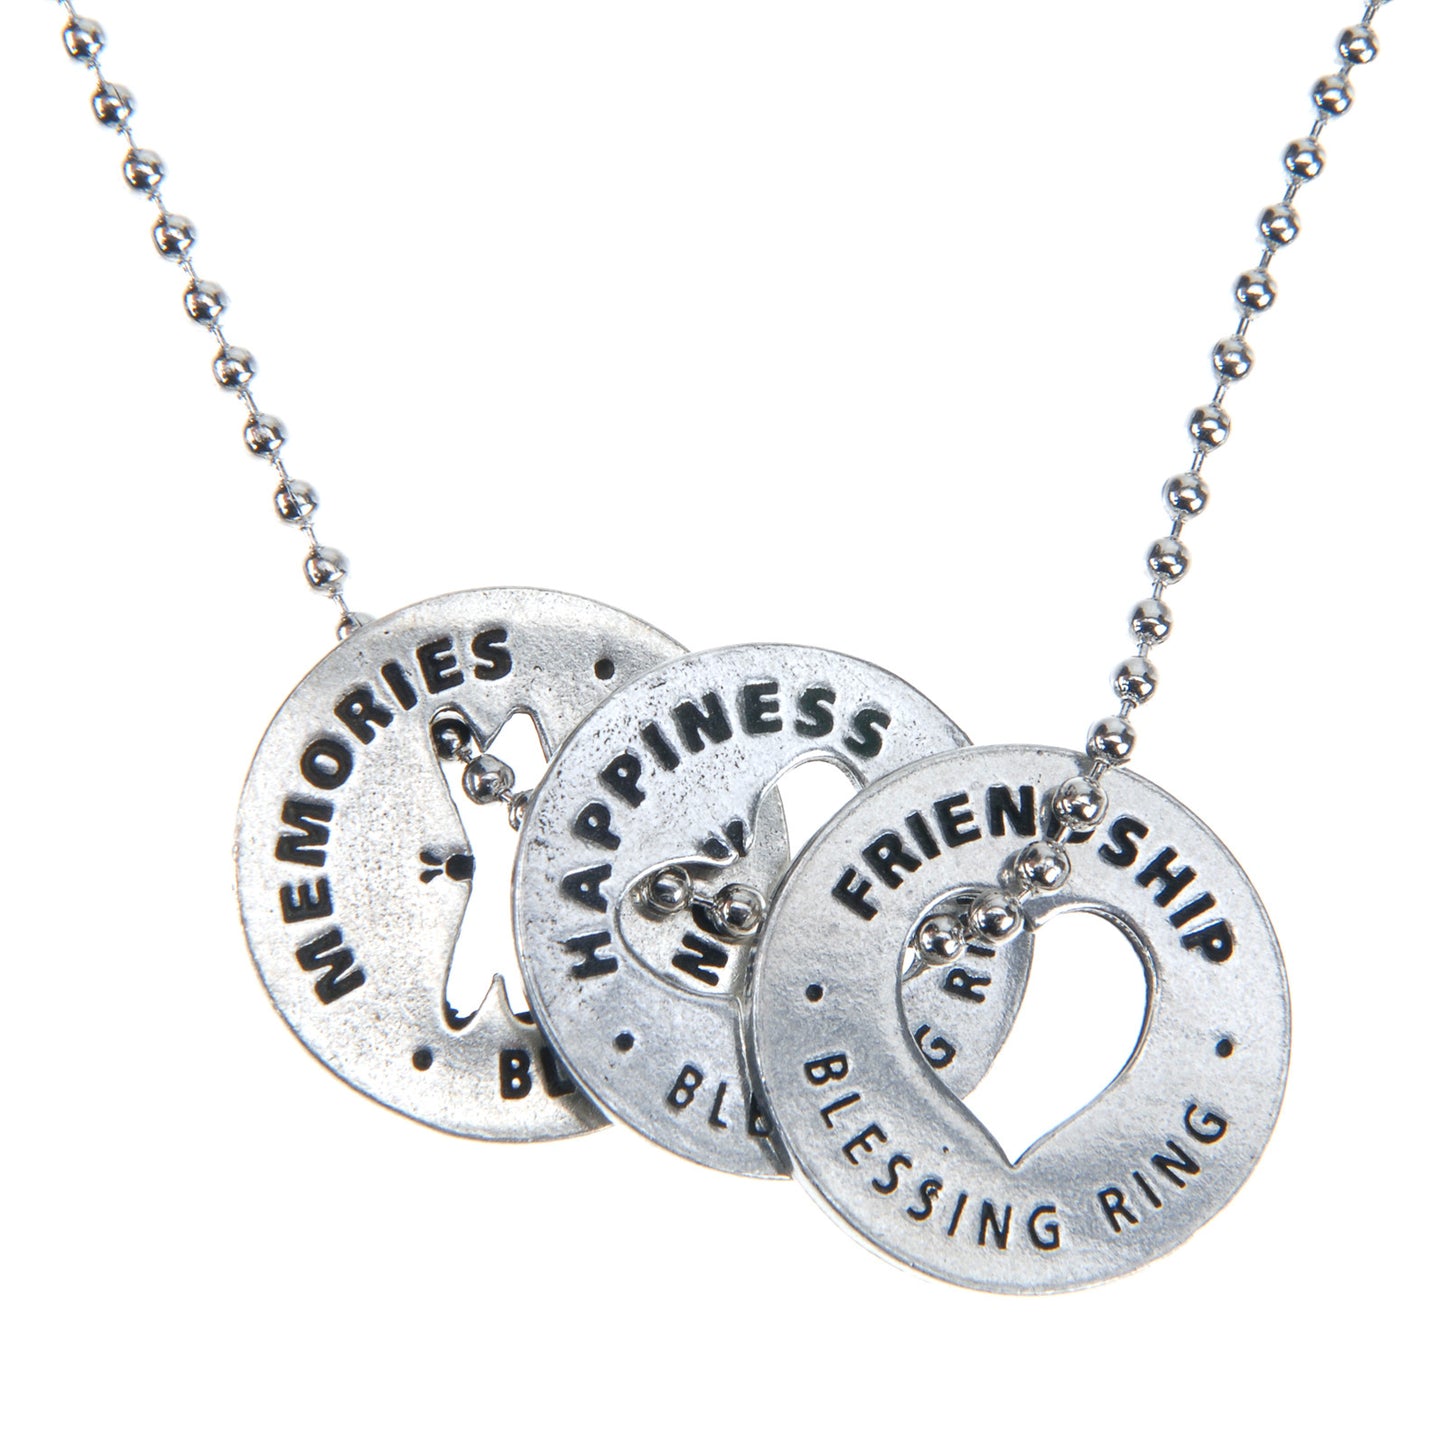 Blessing Rings on necklace